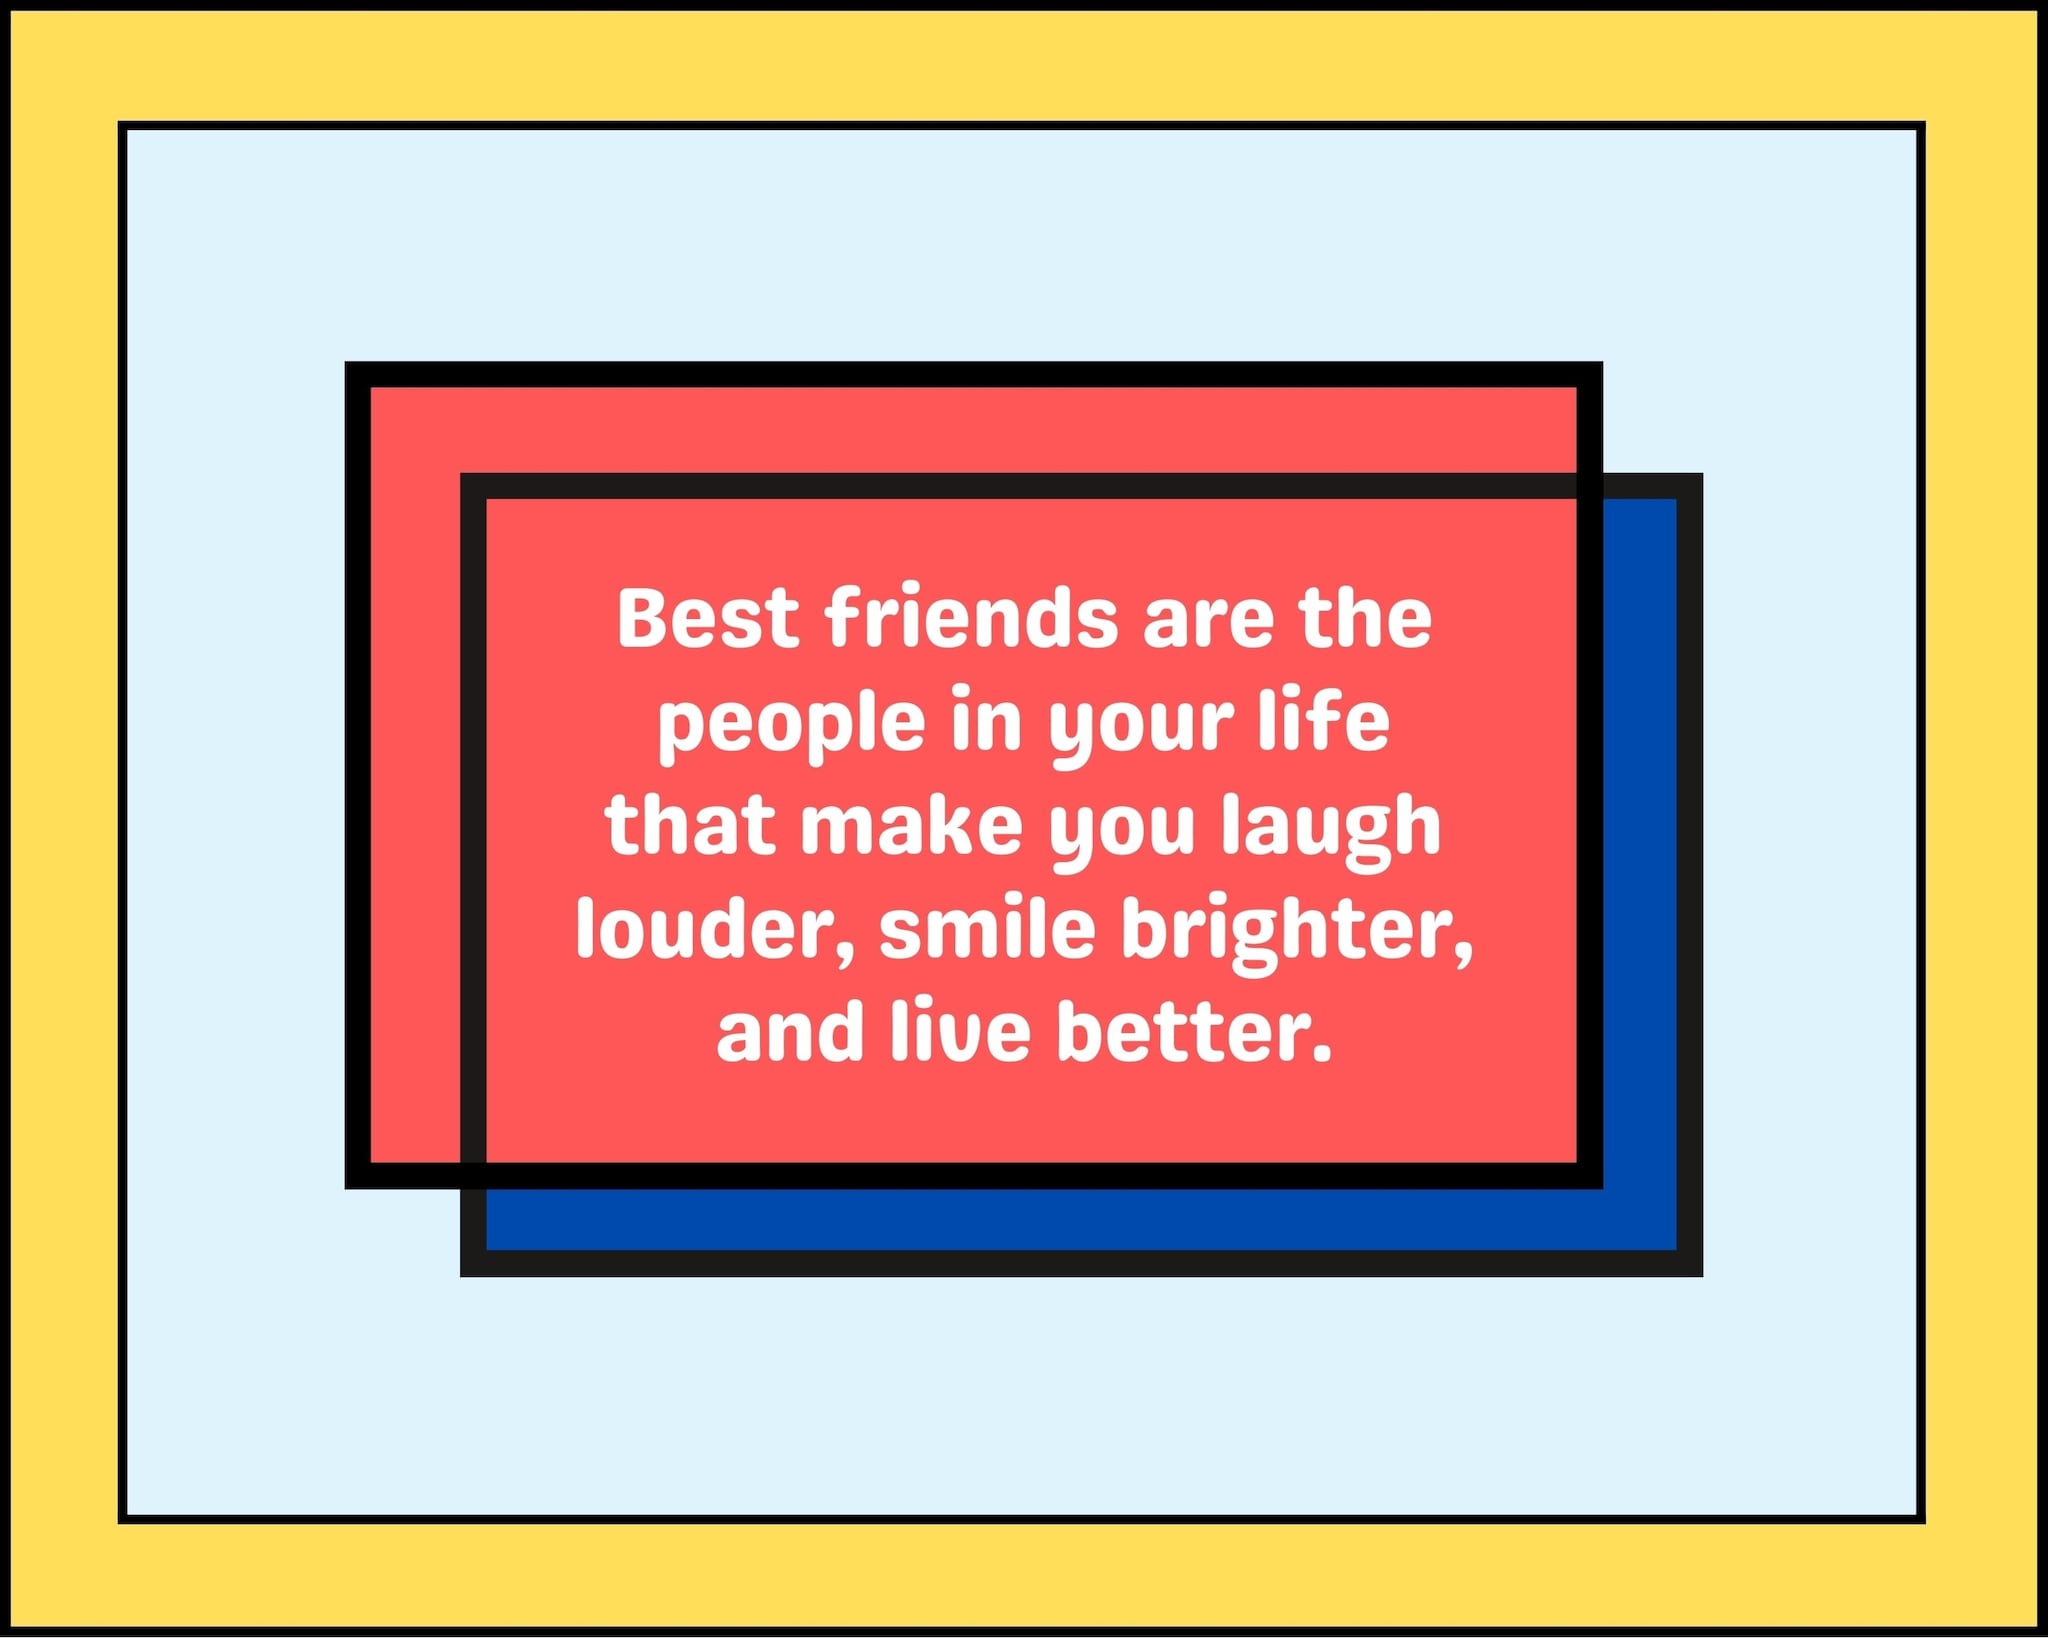 Happy Friendship Day 2022: Wishes Images, Quotes, Photos, Pics, Facebook SMS and Messages to share with your loved ones. (Image: Shutterstock) 